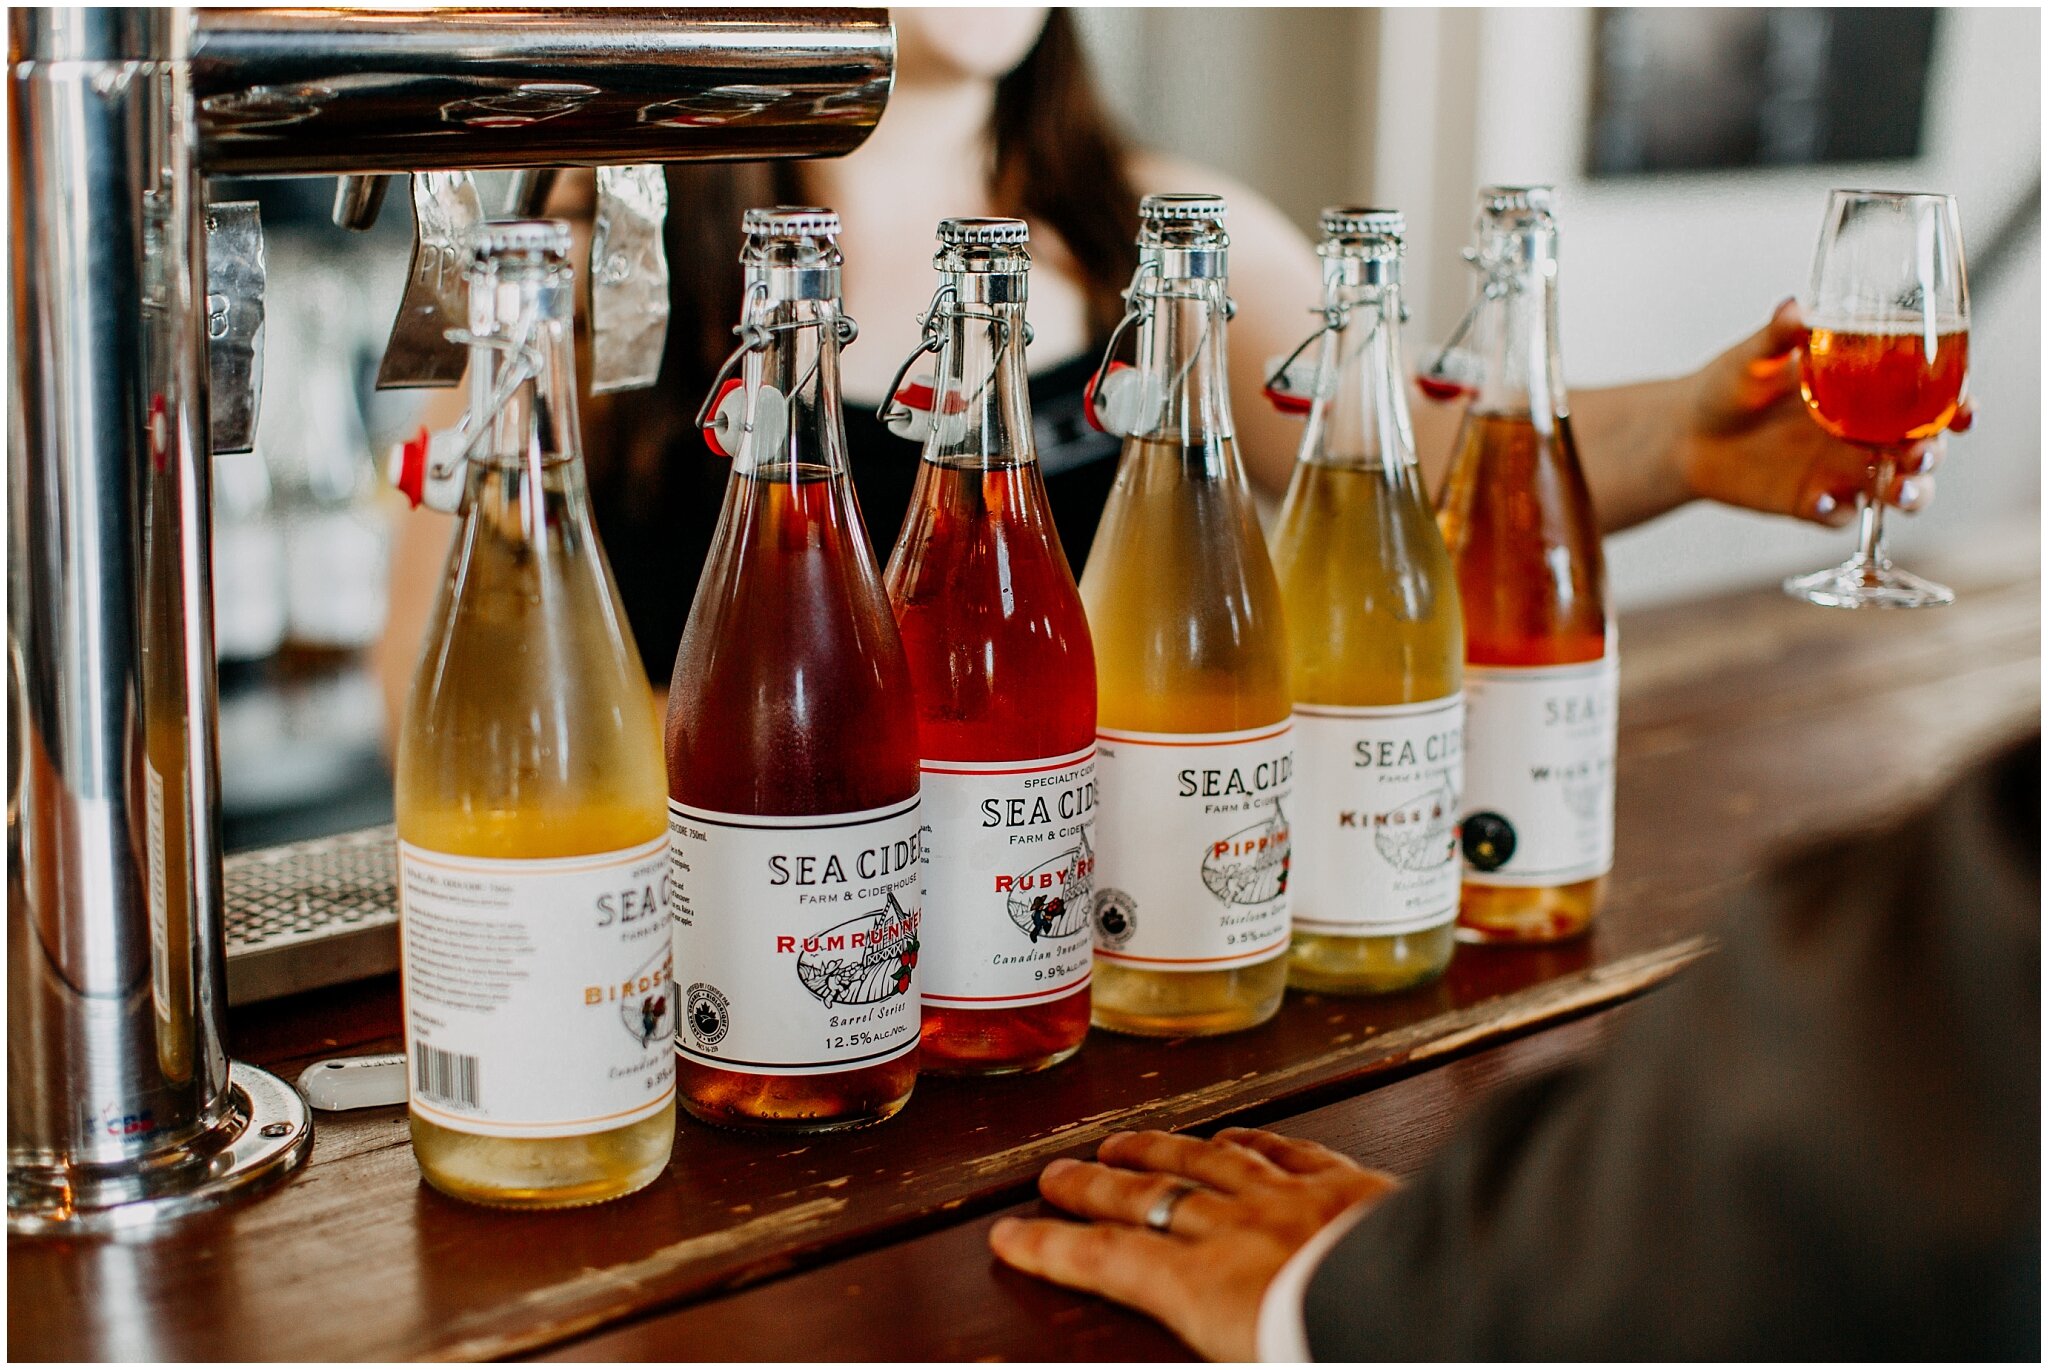 bottles of cider from sea cider farm and ciderhouse